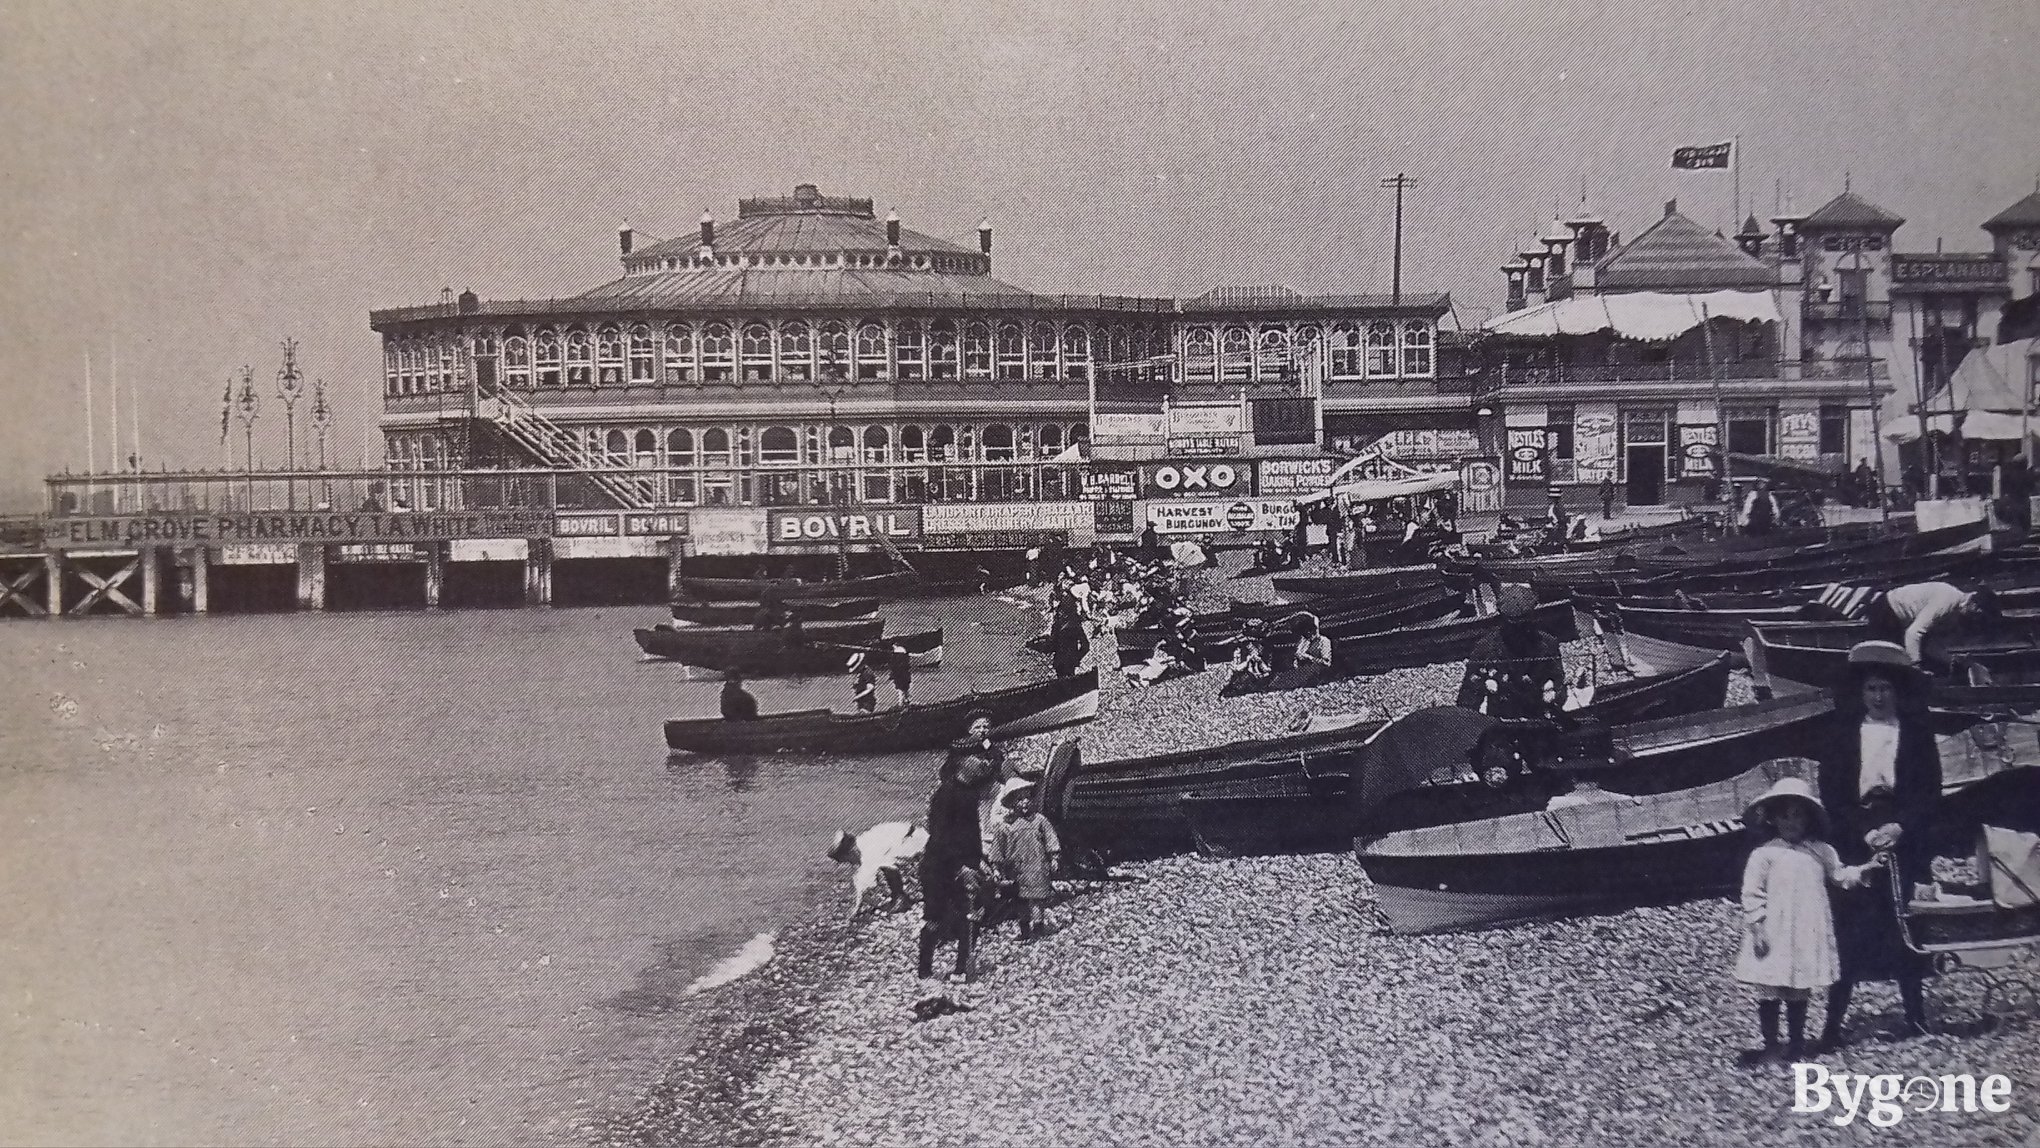 Clarence Pier, 1911